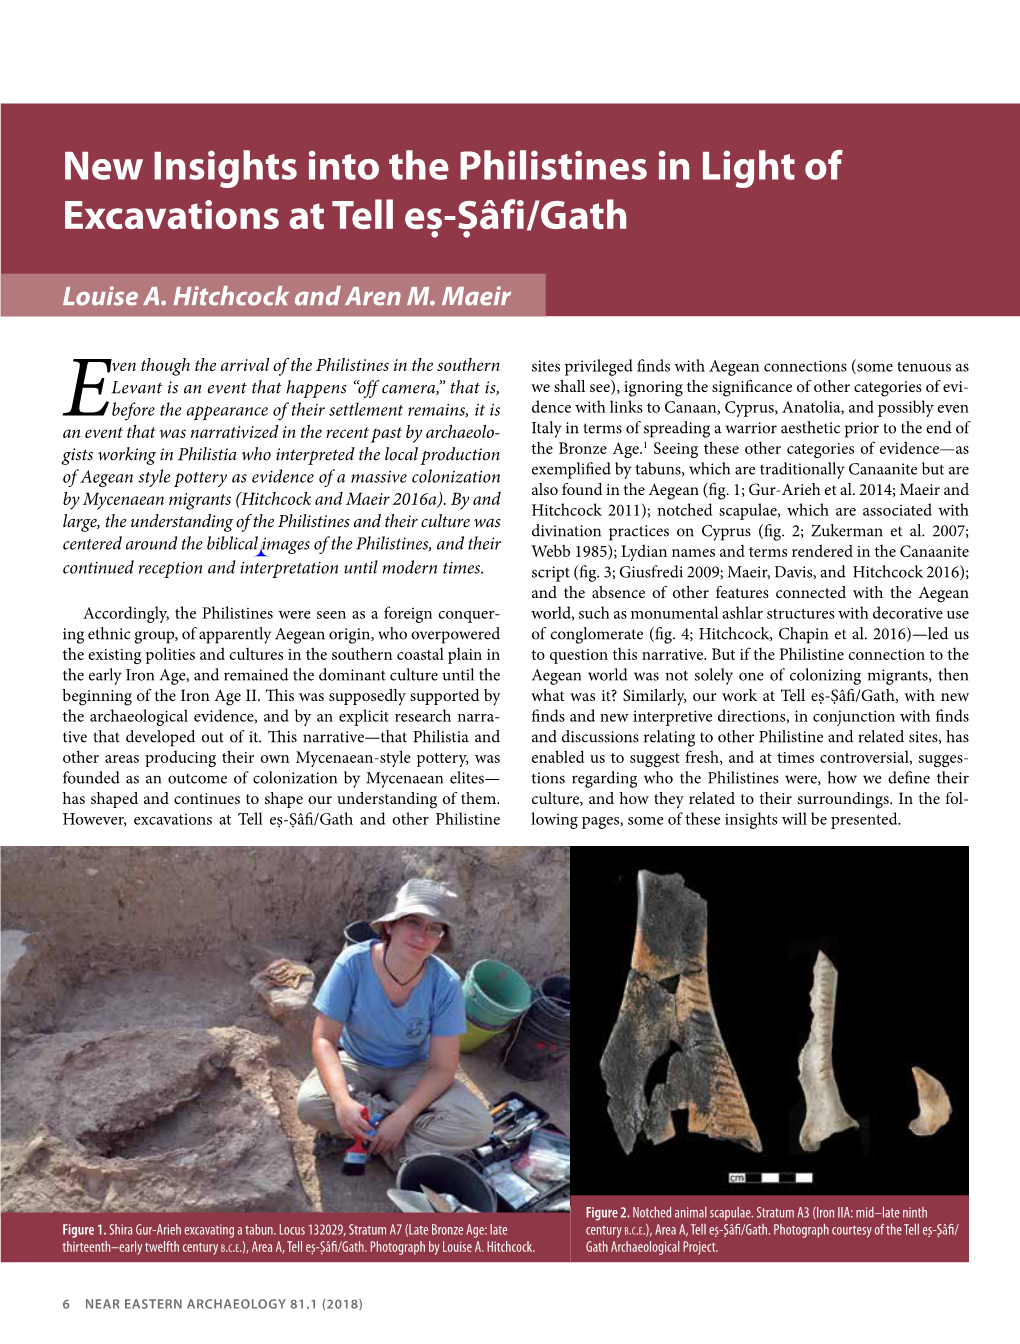 New Insights Into the Philistines in Light of Excavations at Tell Es -S